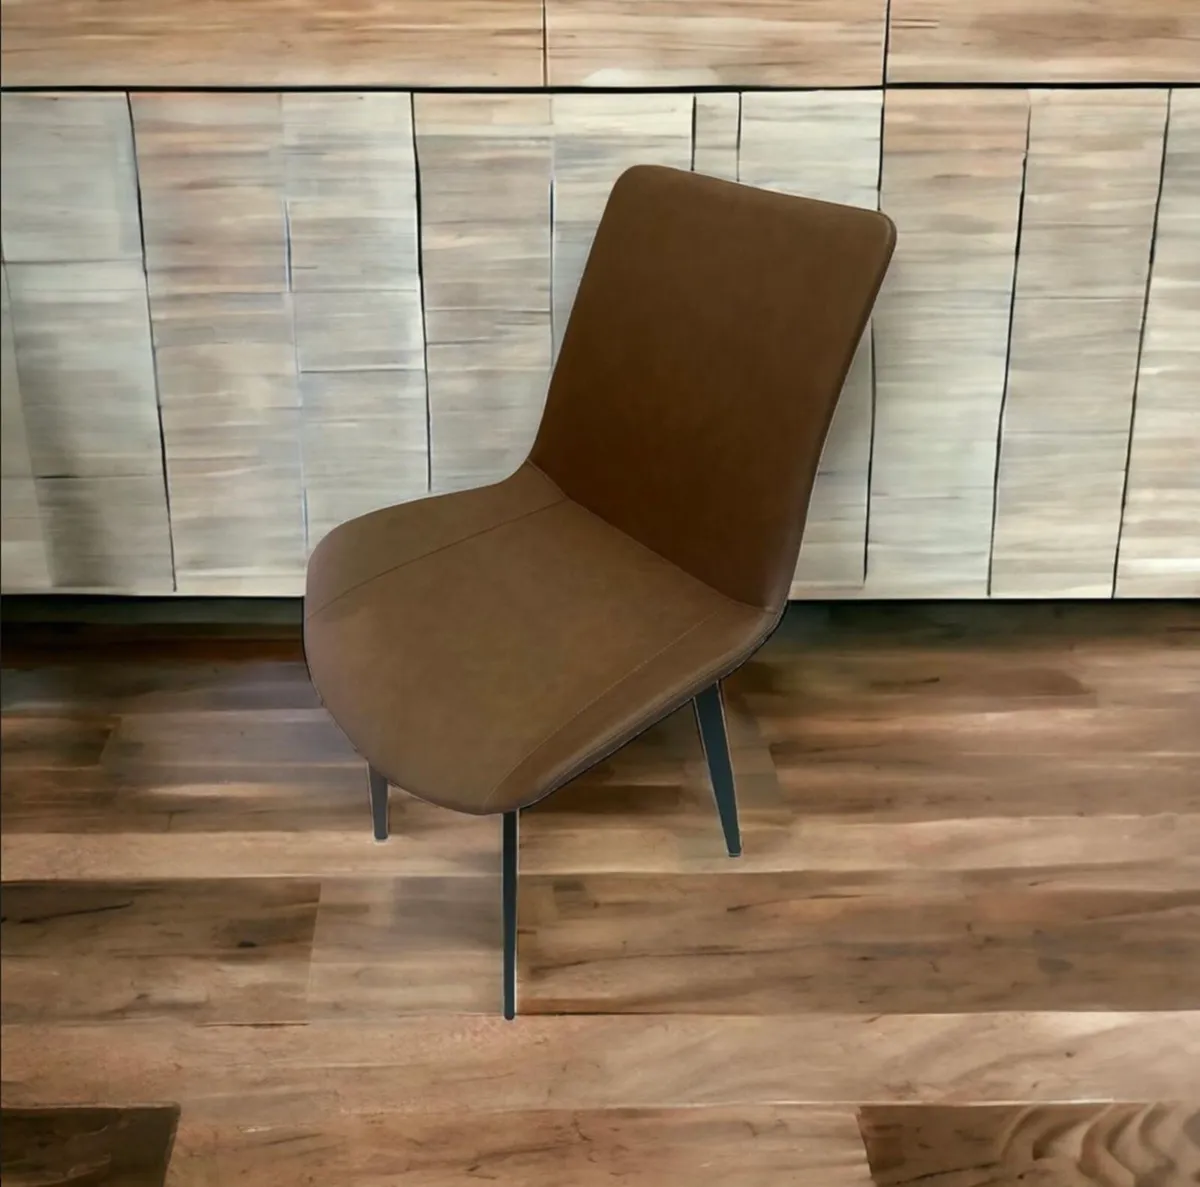 New - Brown Leatherette Dining Chair - Clearence